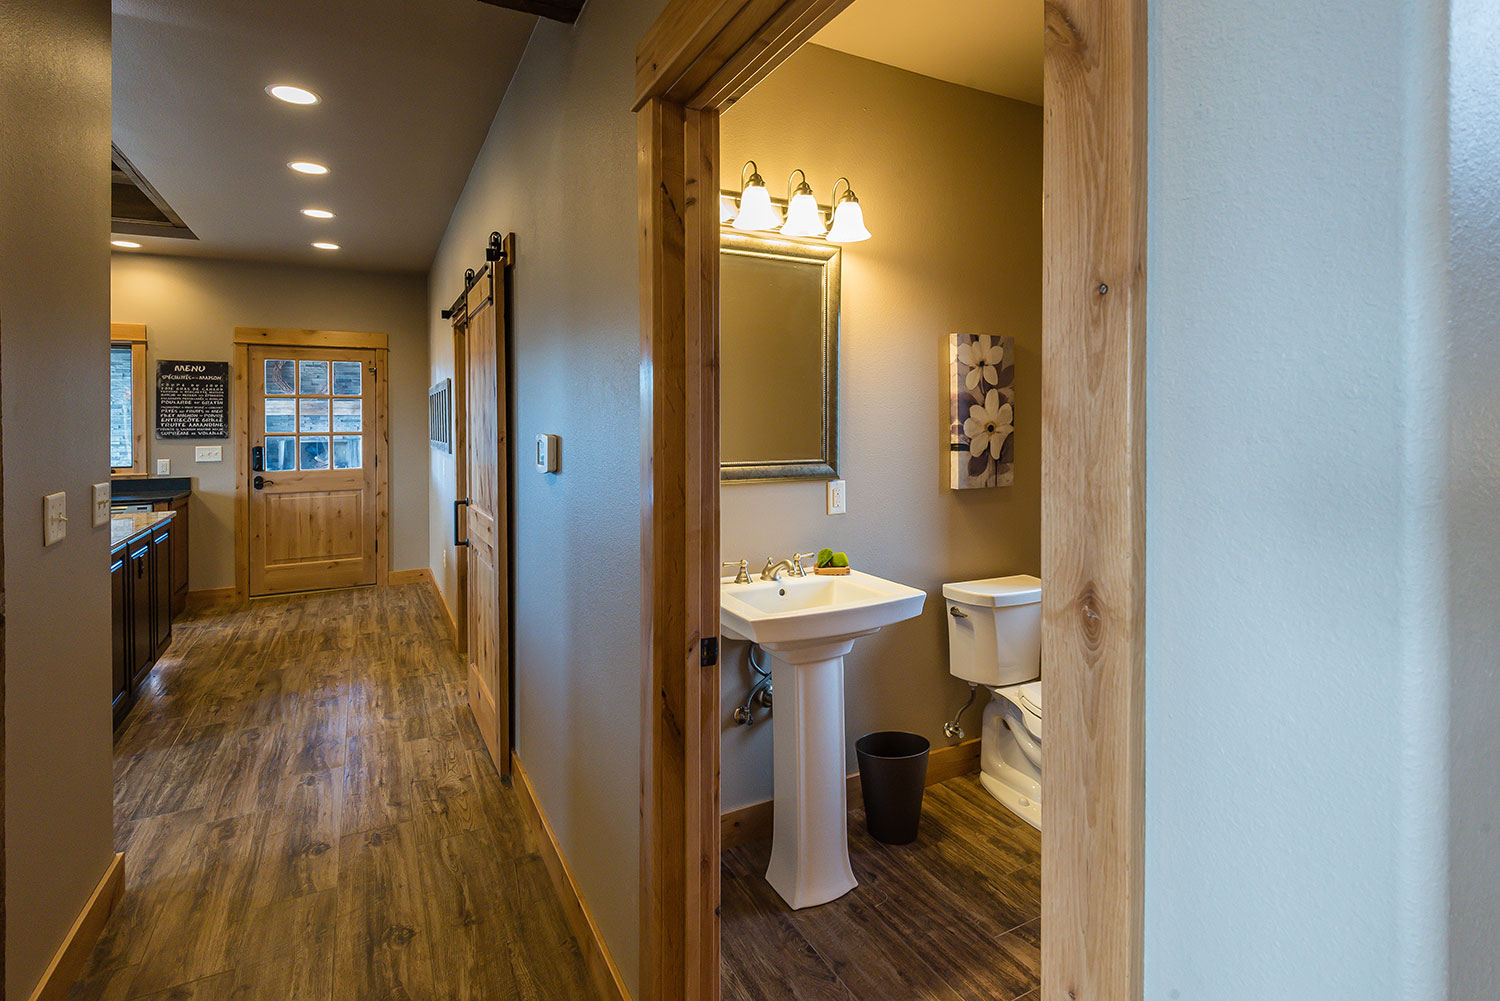 View down hallway into kitchen with a side view of a vanity with a pedestal sink and toilet in the bathroom